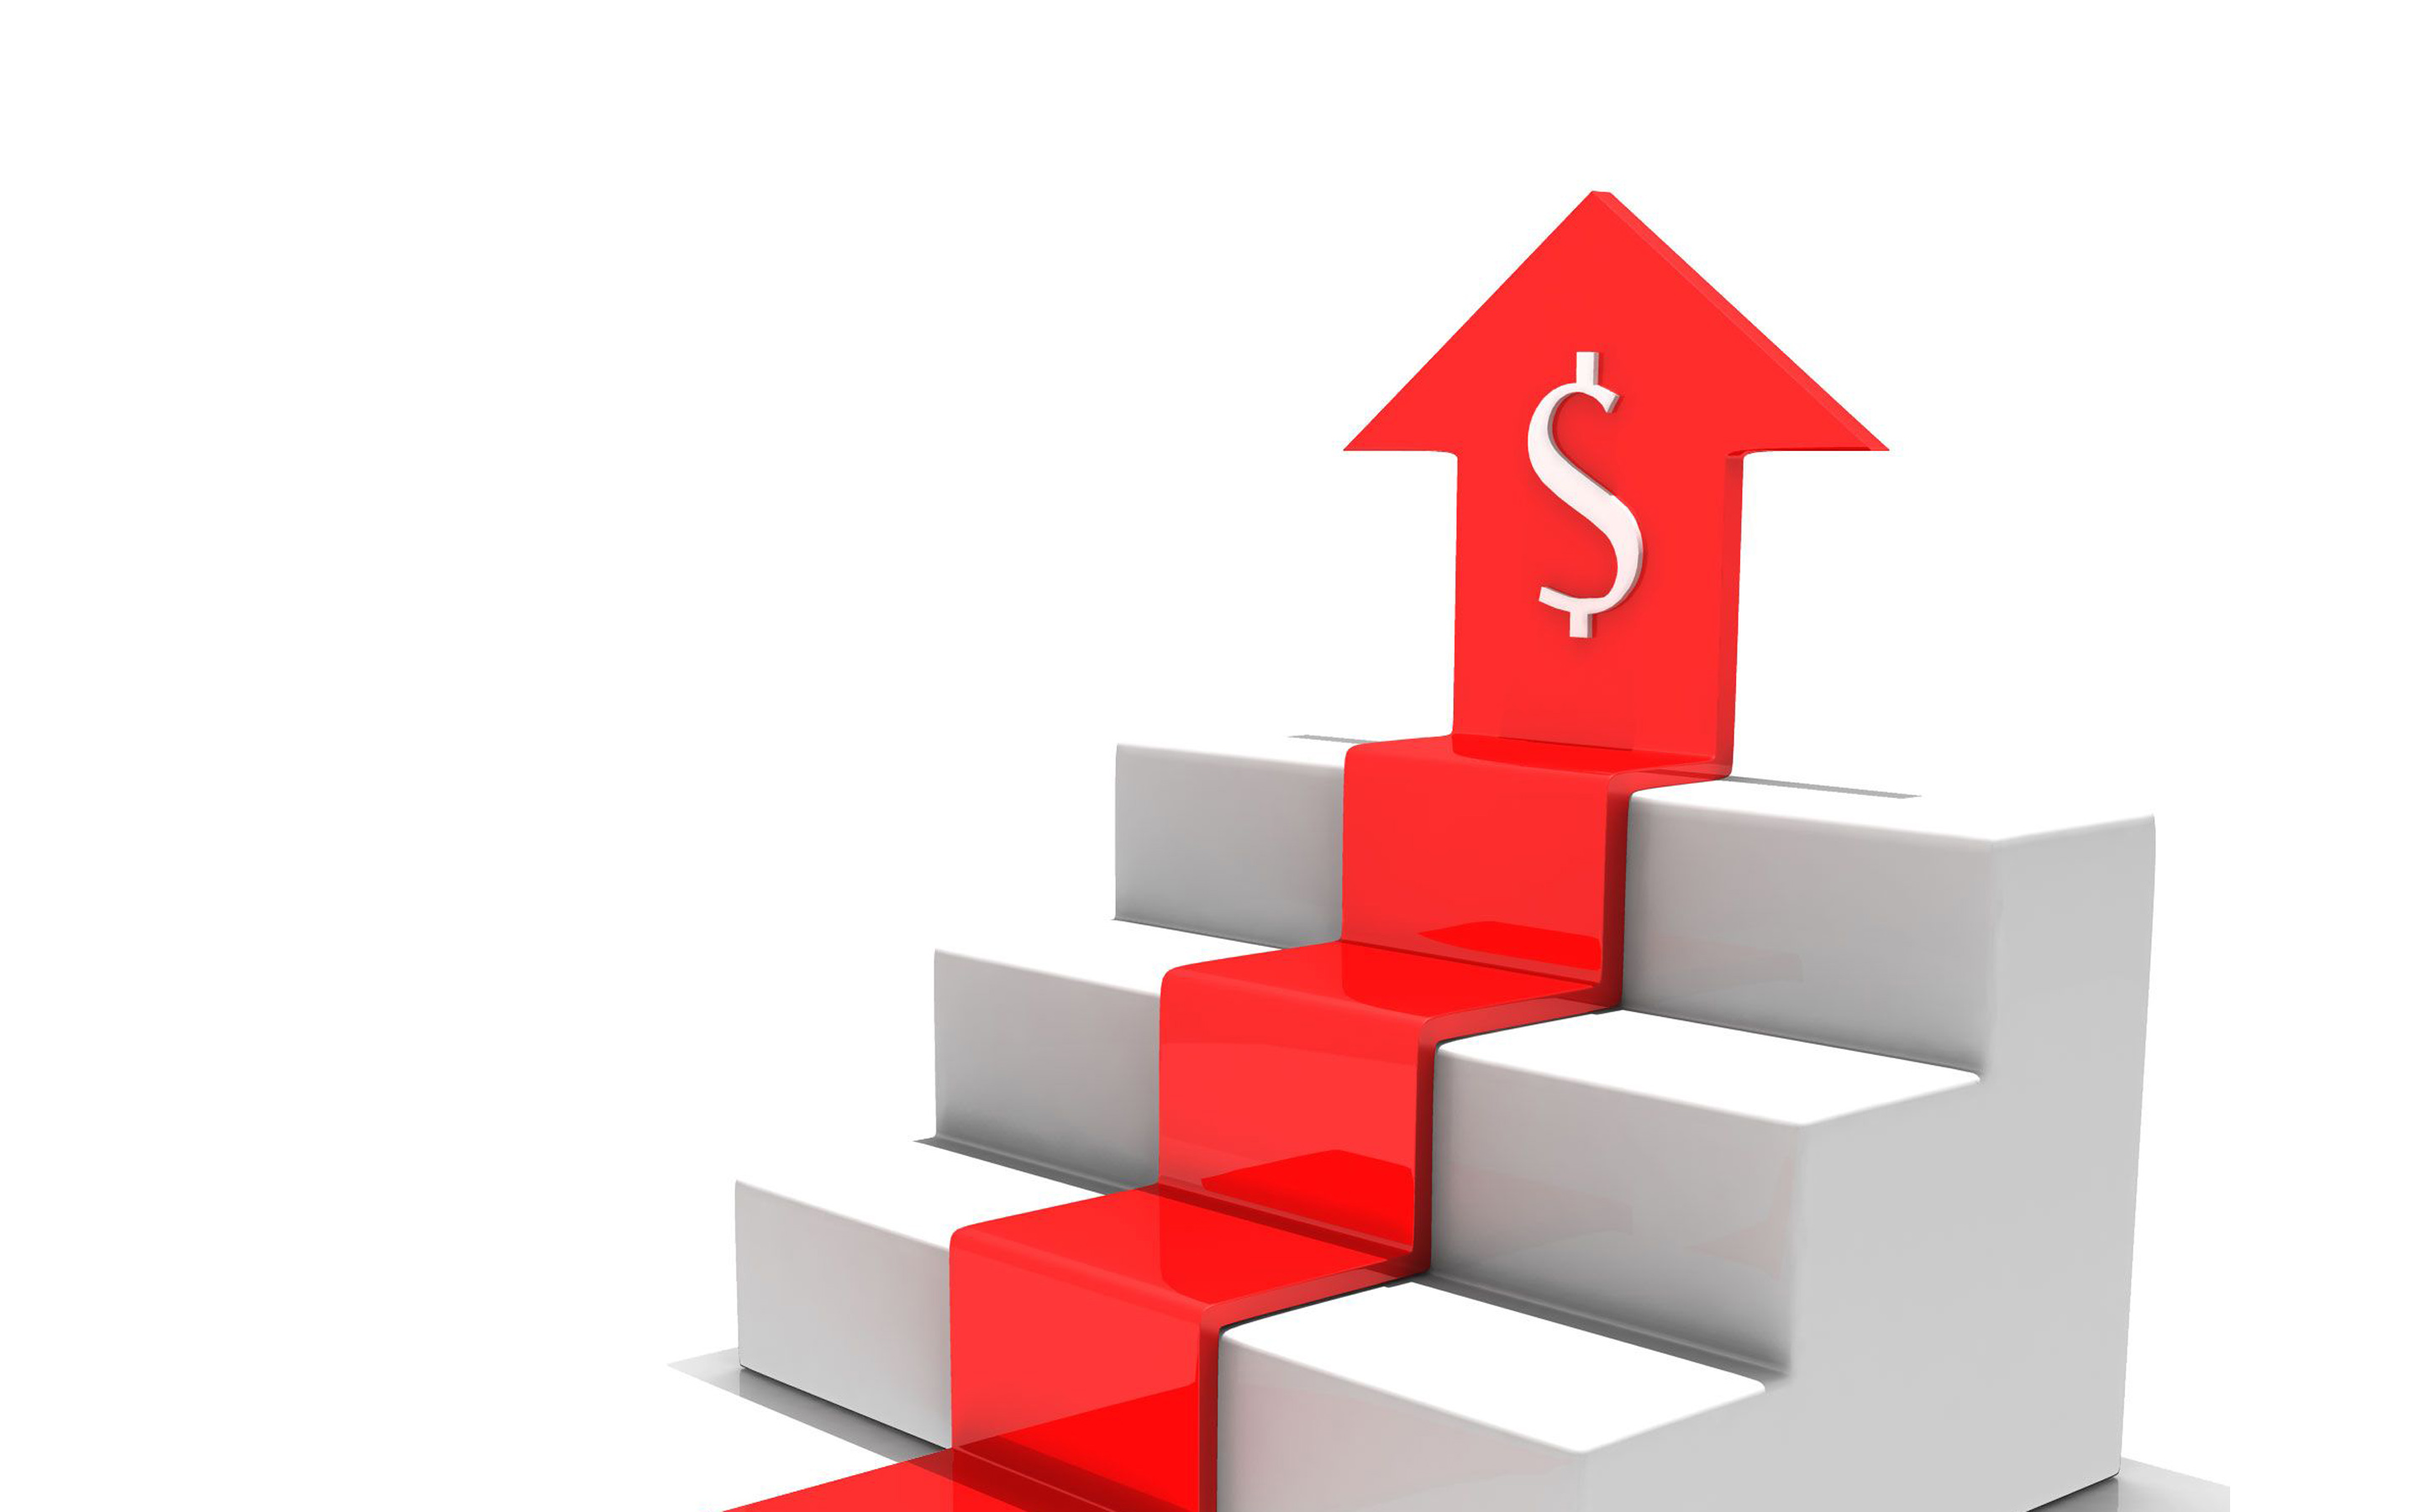 Download wallpaper dollar growth, 3D red arrow, business, 3D white steps, 3D white stairs, 3D red graph, business 3D background, american dollars, dollar rate, growth concepts for desktop with resolution 2880x1800. High